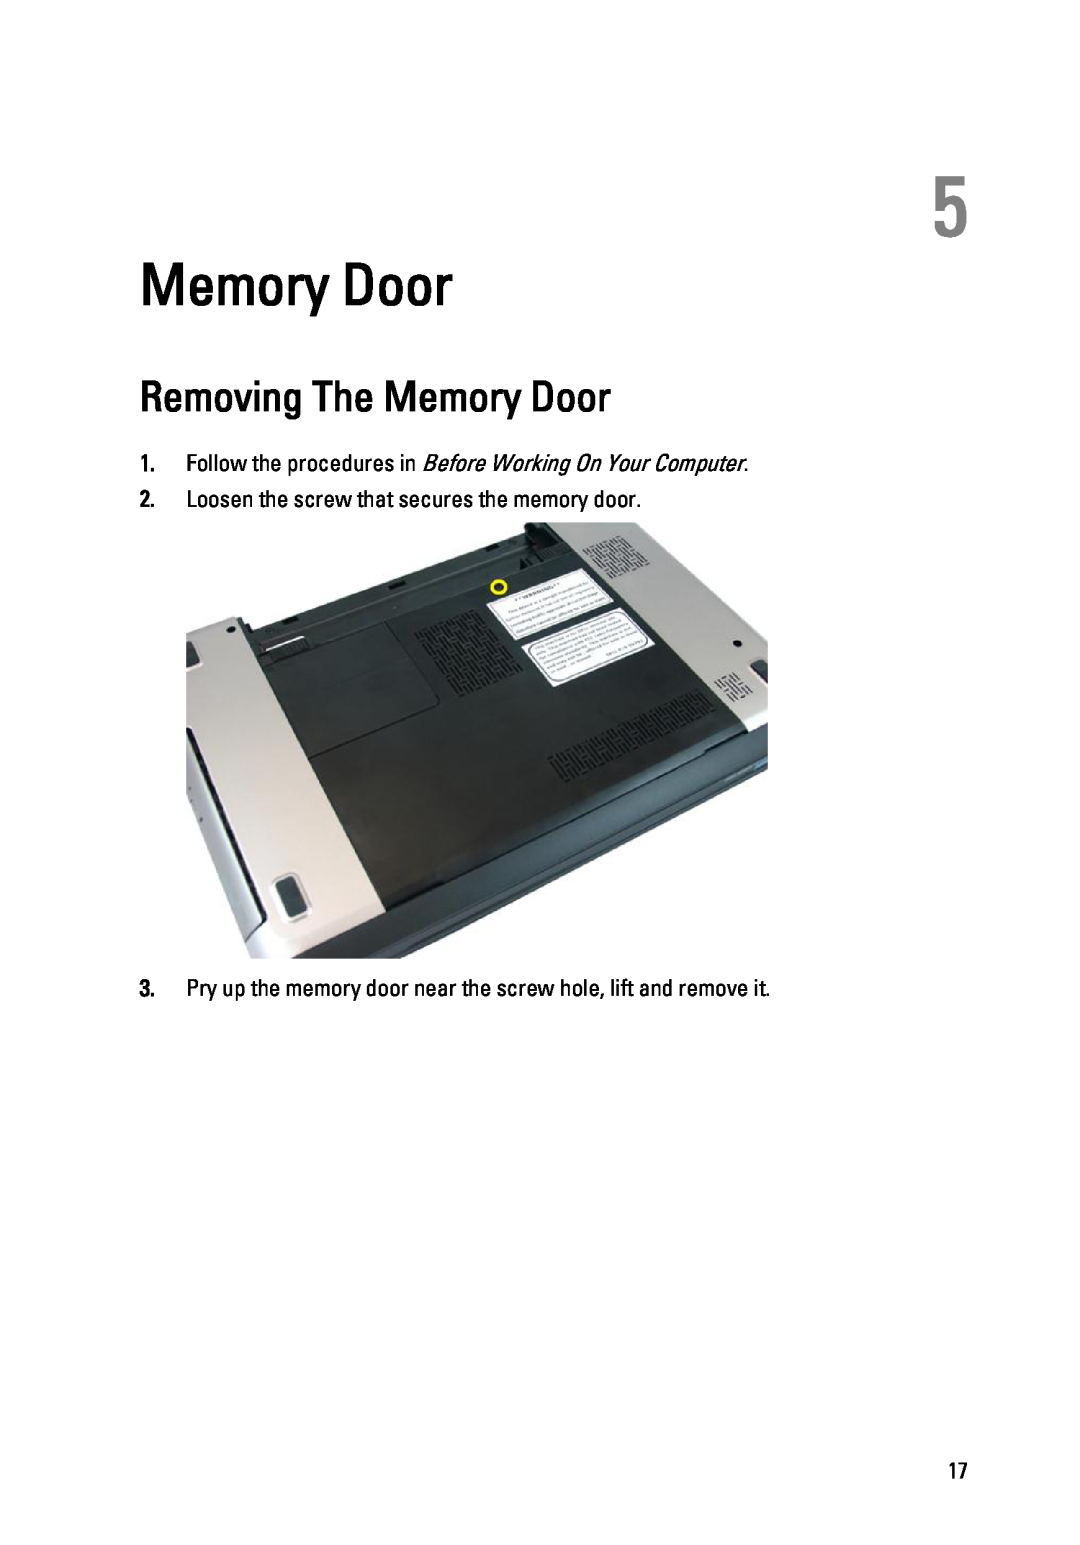 Dell 3450 owner manual Removing The Memory Door, Loosen the screw that secures the memory door 